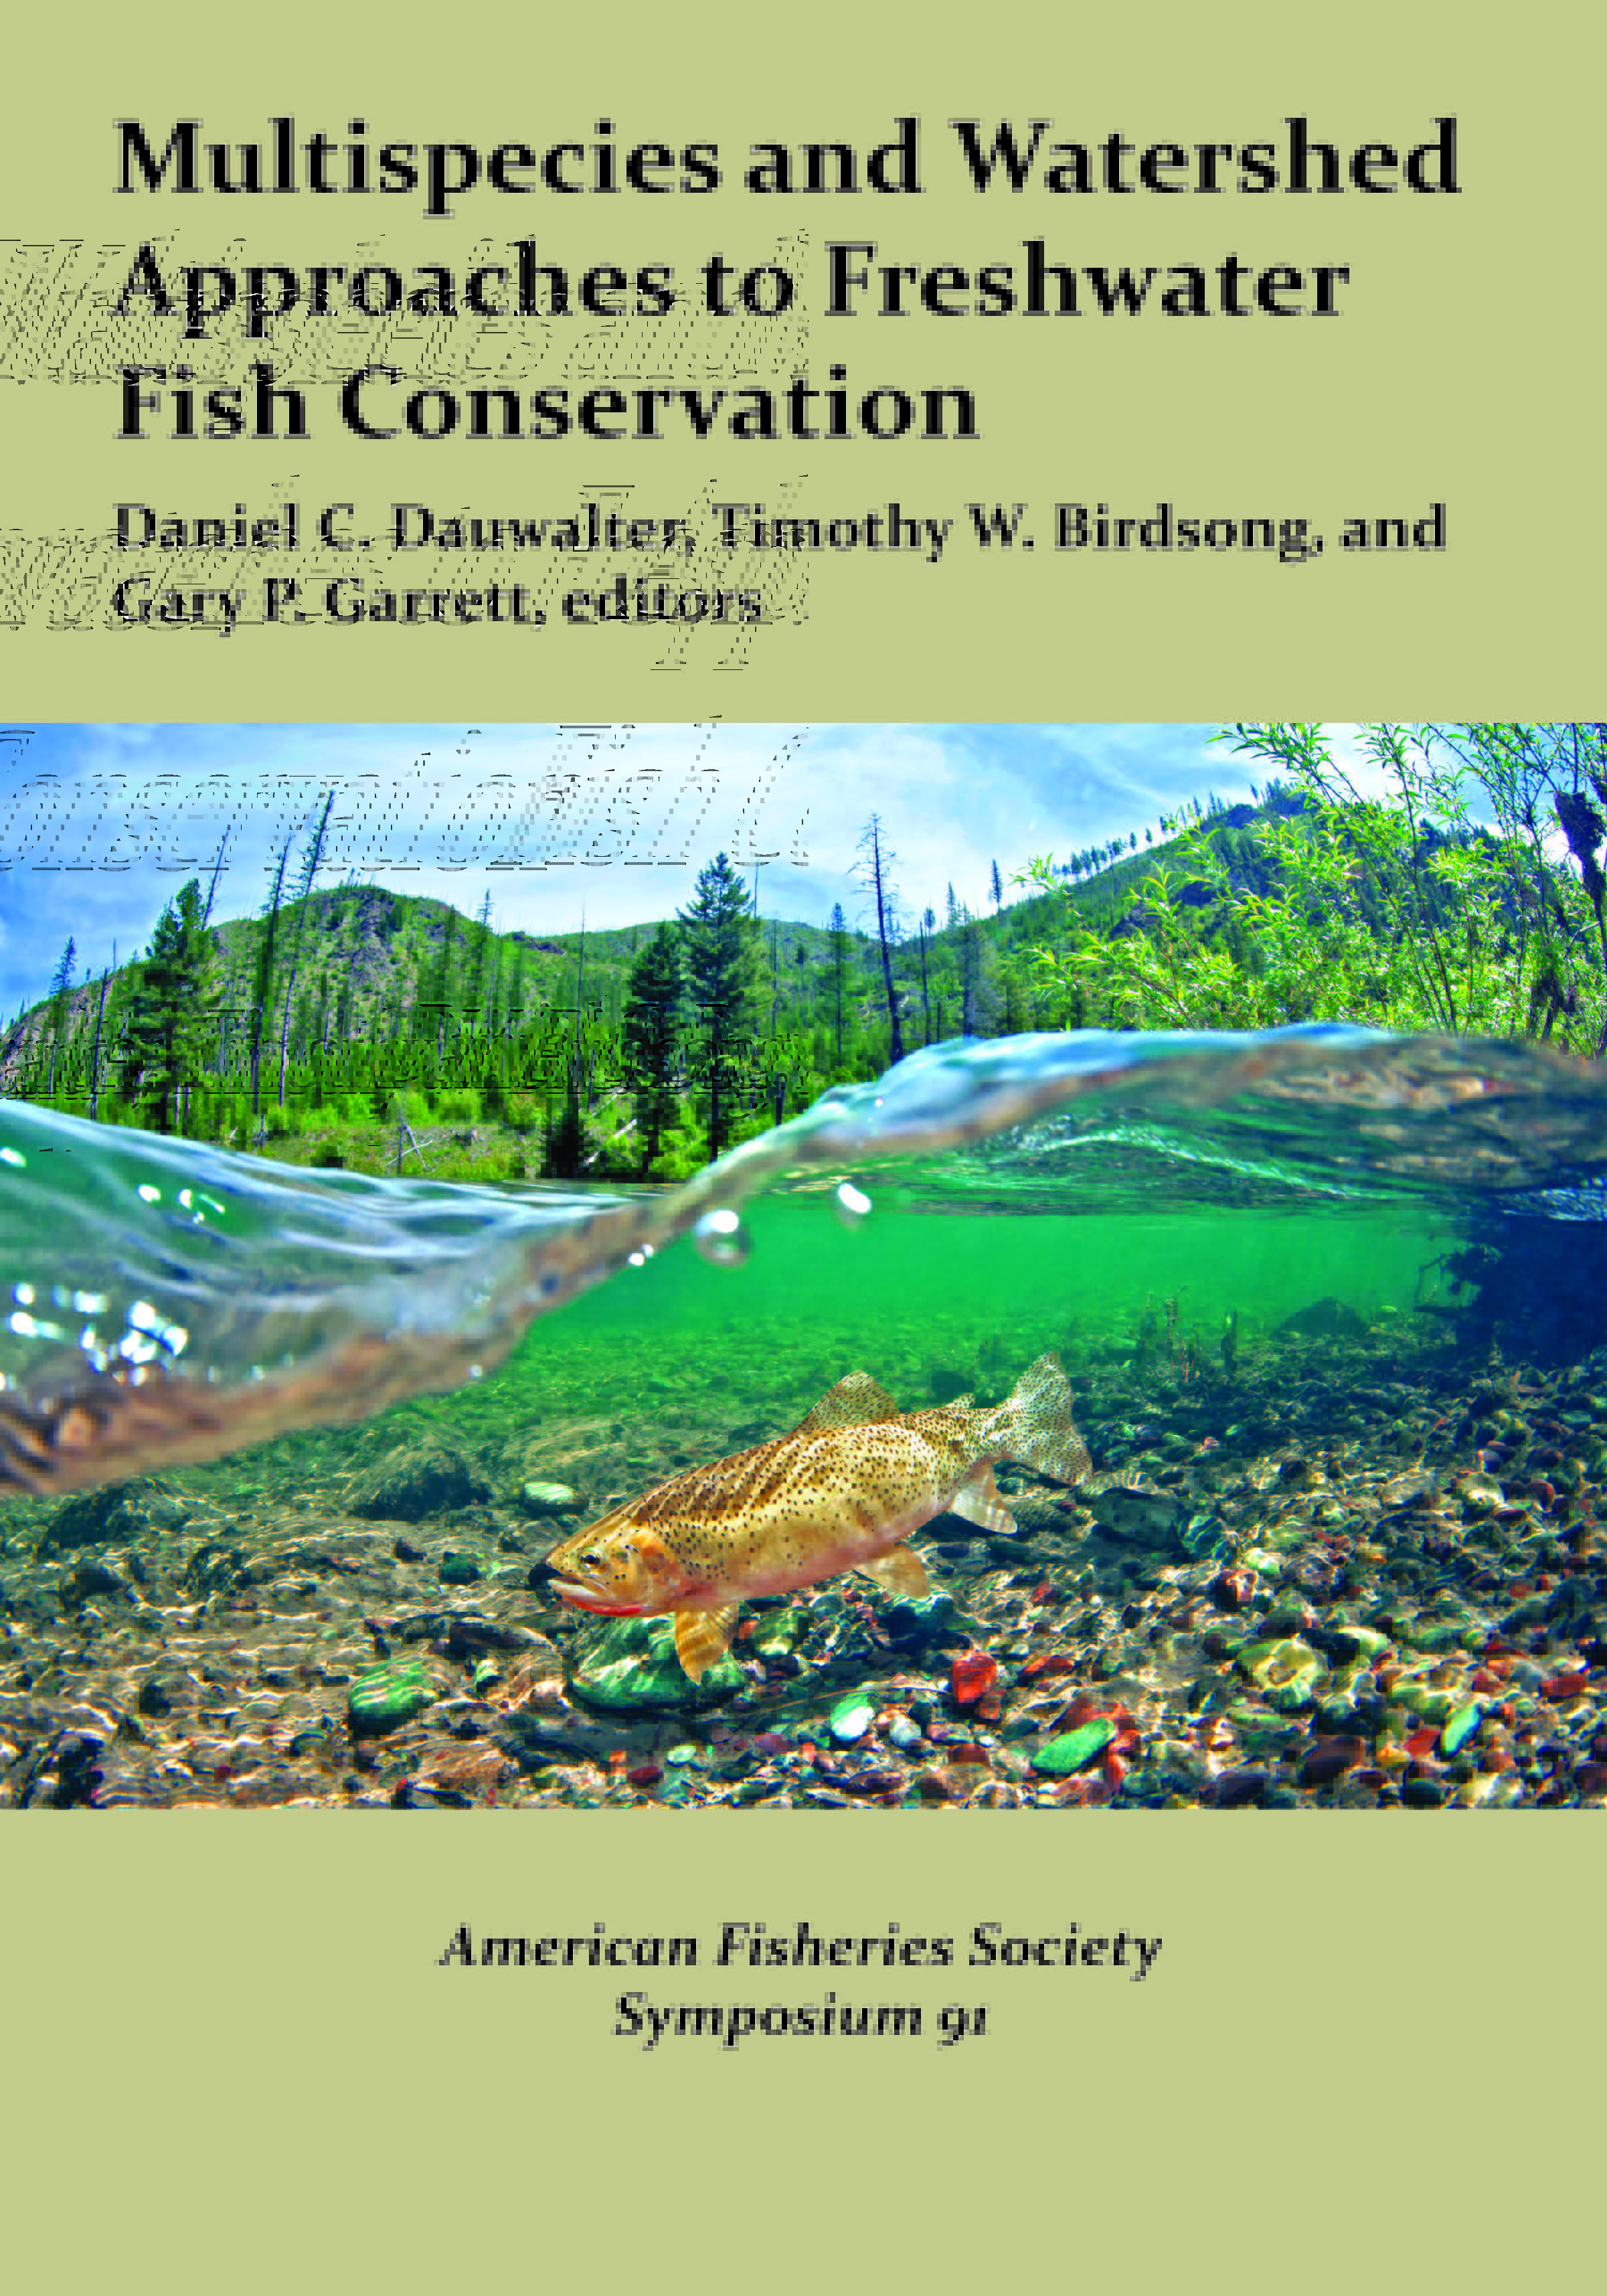 Multispecies and Watershed Approaches to Freshwater Fish Conservation –  American Fisheries Society